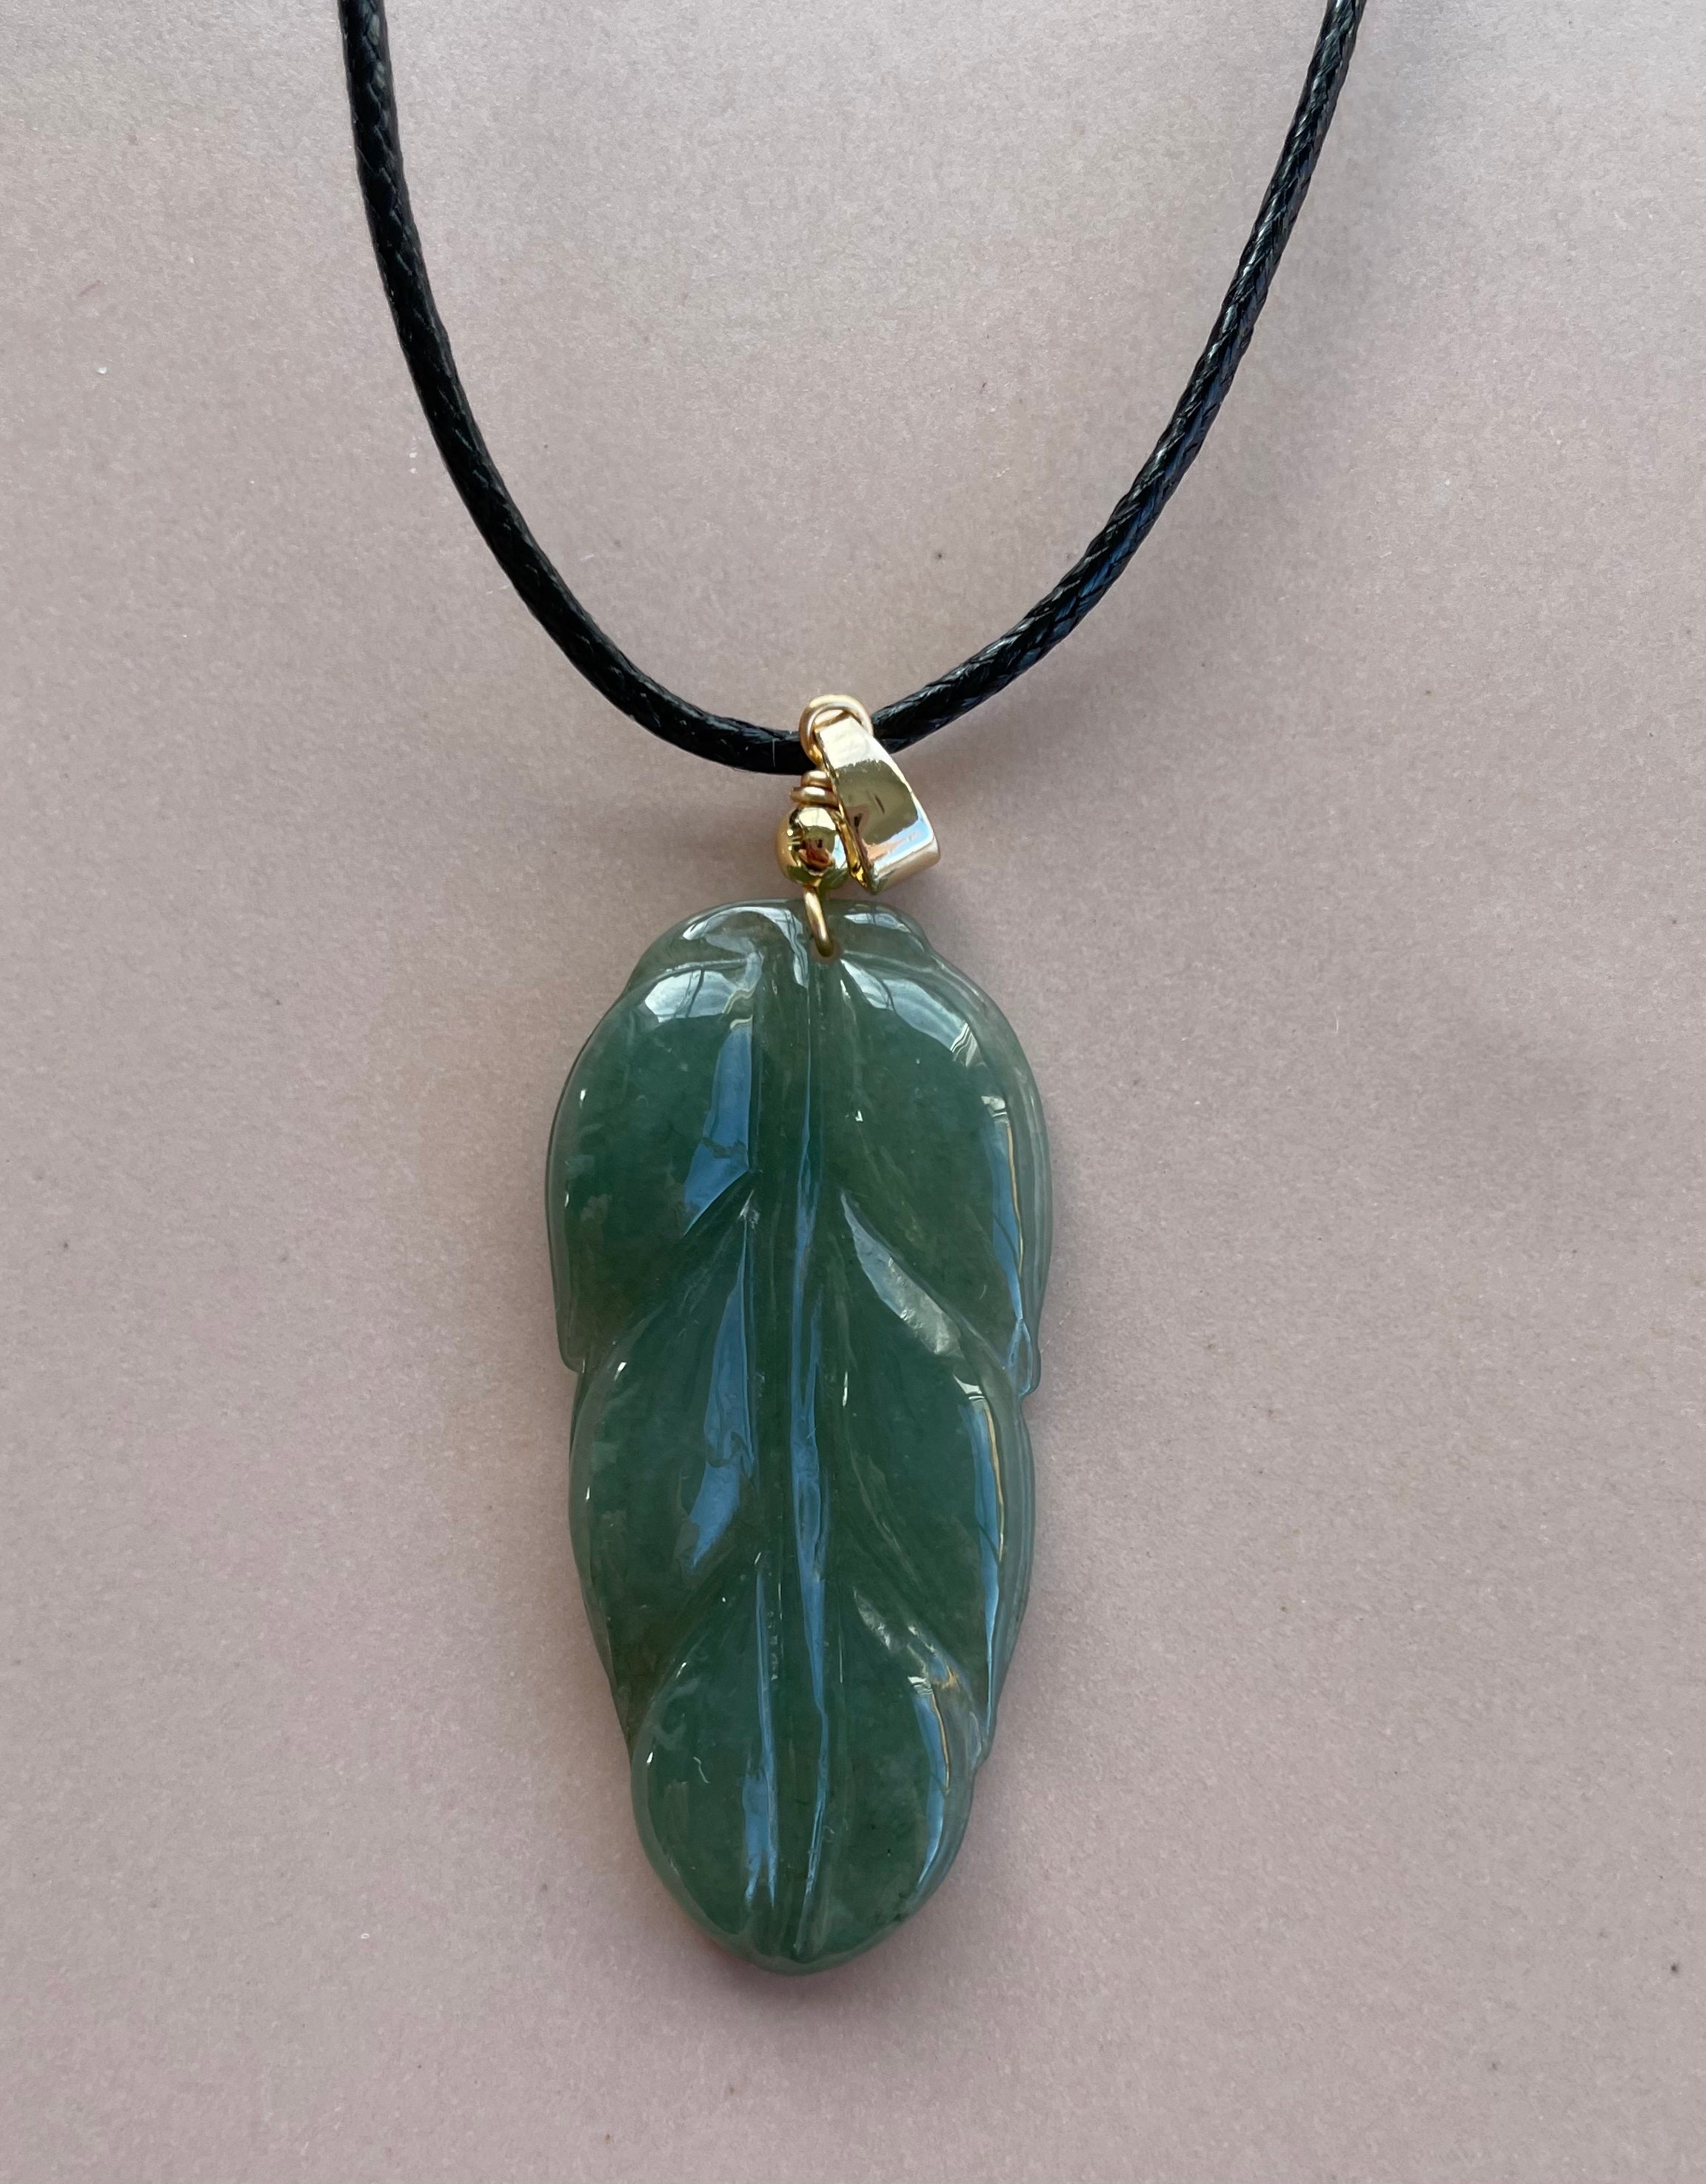 100% Natural Chinese Icy Full Green Jade Leaf Pendant 005